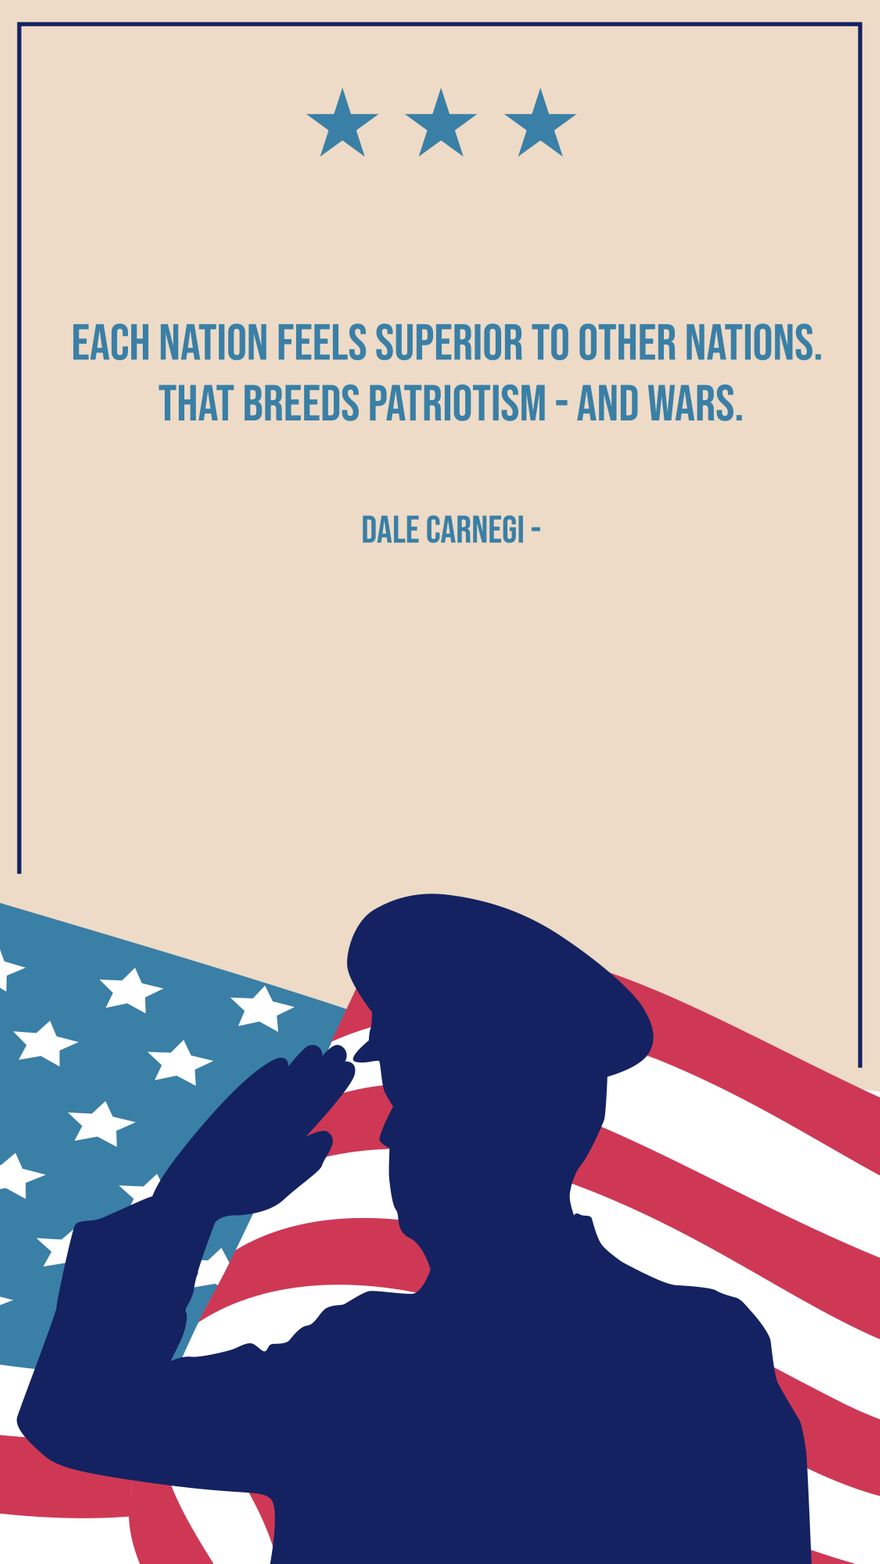 Free Dale Carnegi - Each nation feels superior to other nations. That breeds patriotism - and wars.